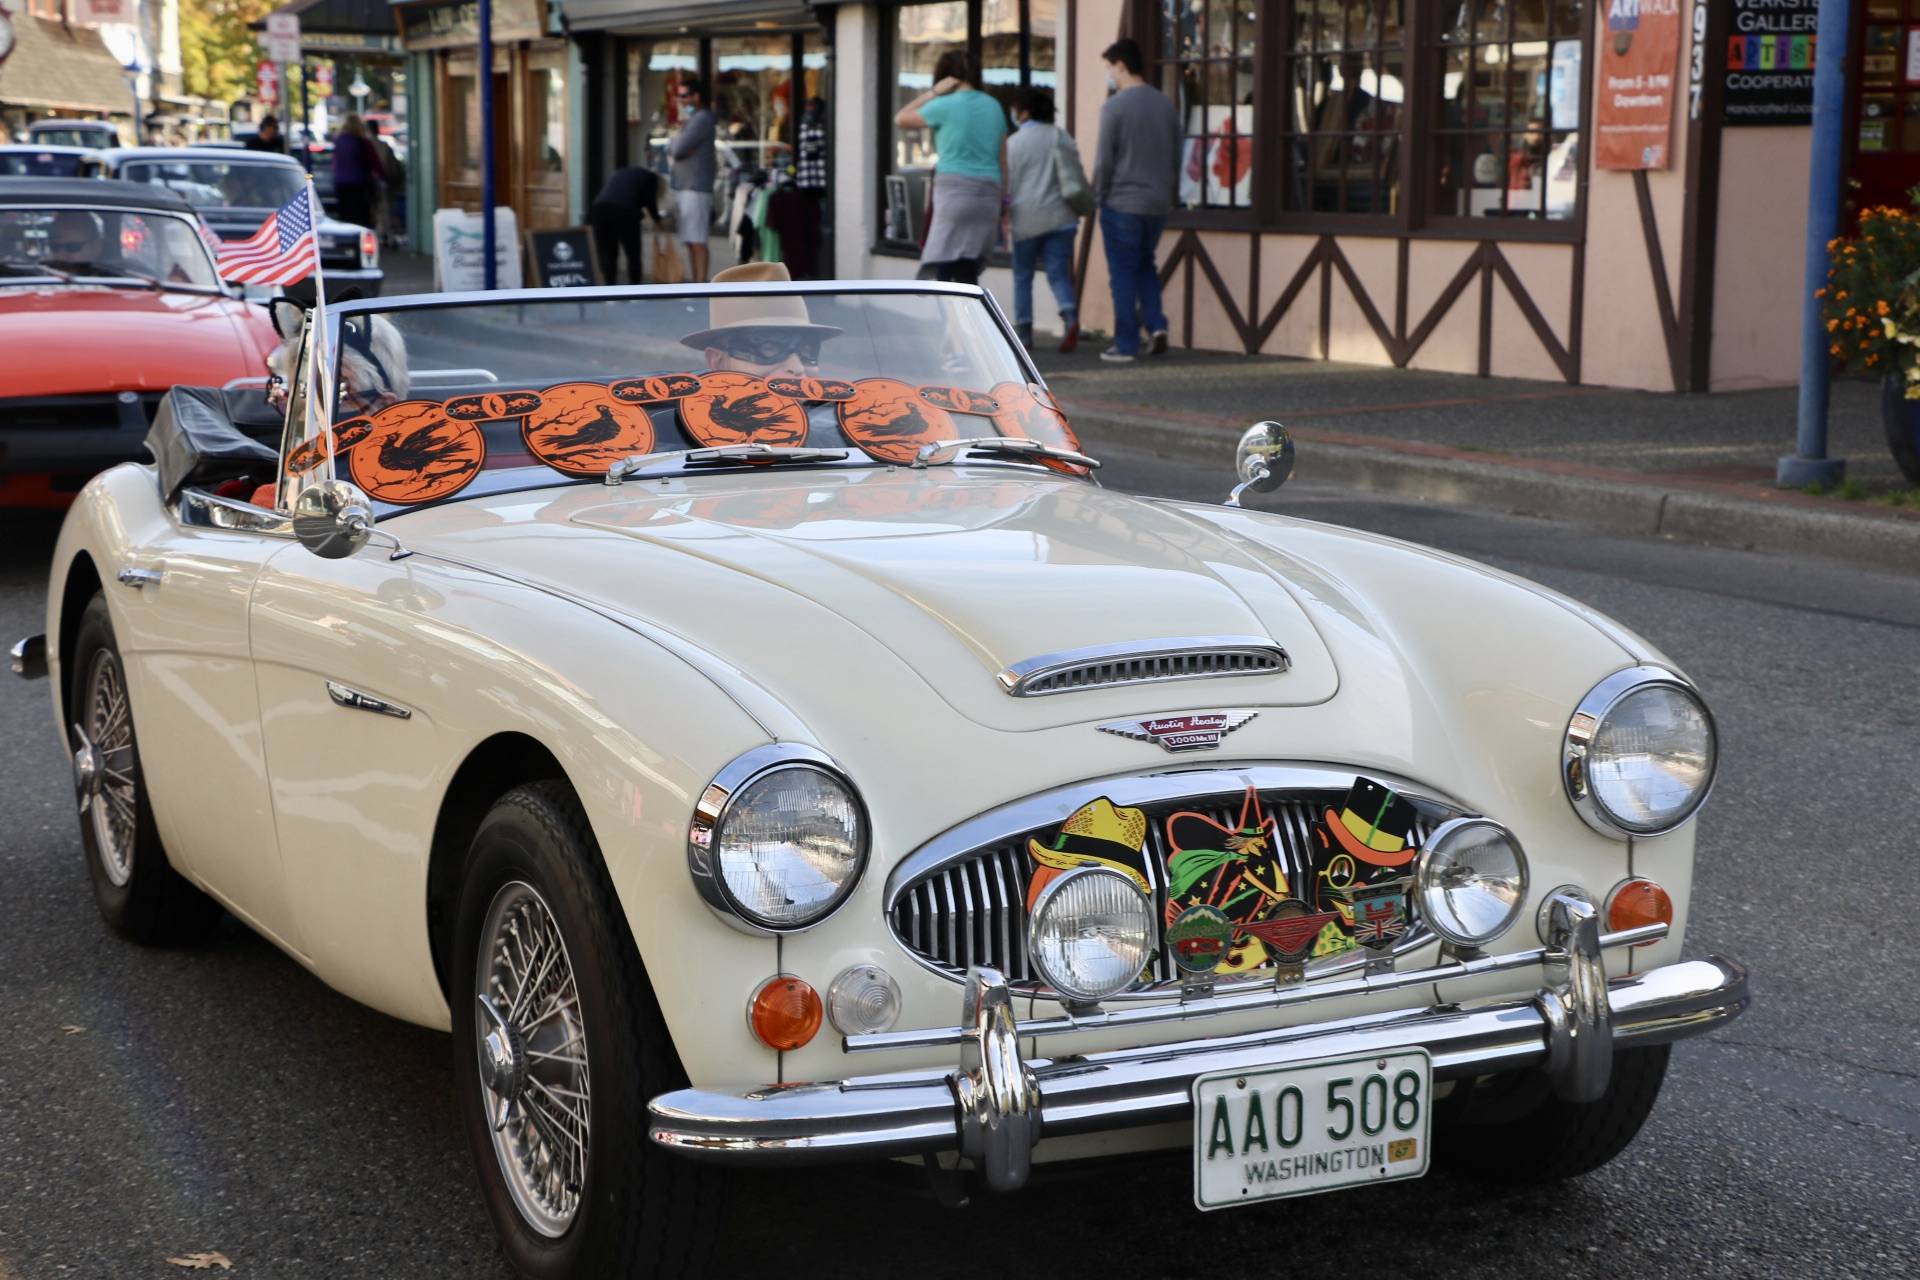 This roadster is in search of The Great Pumpkin!